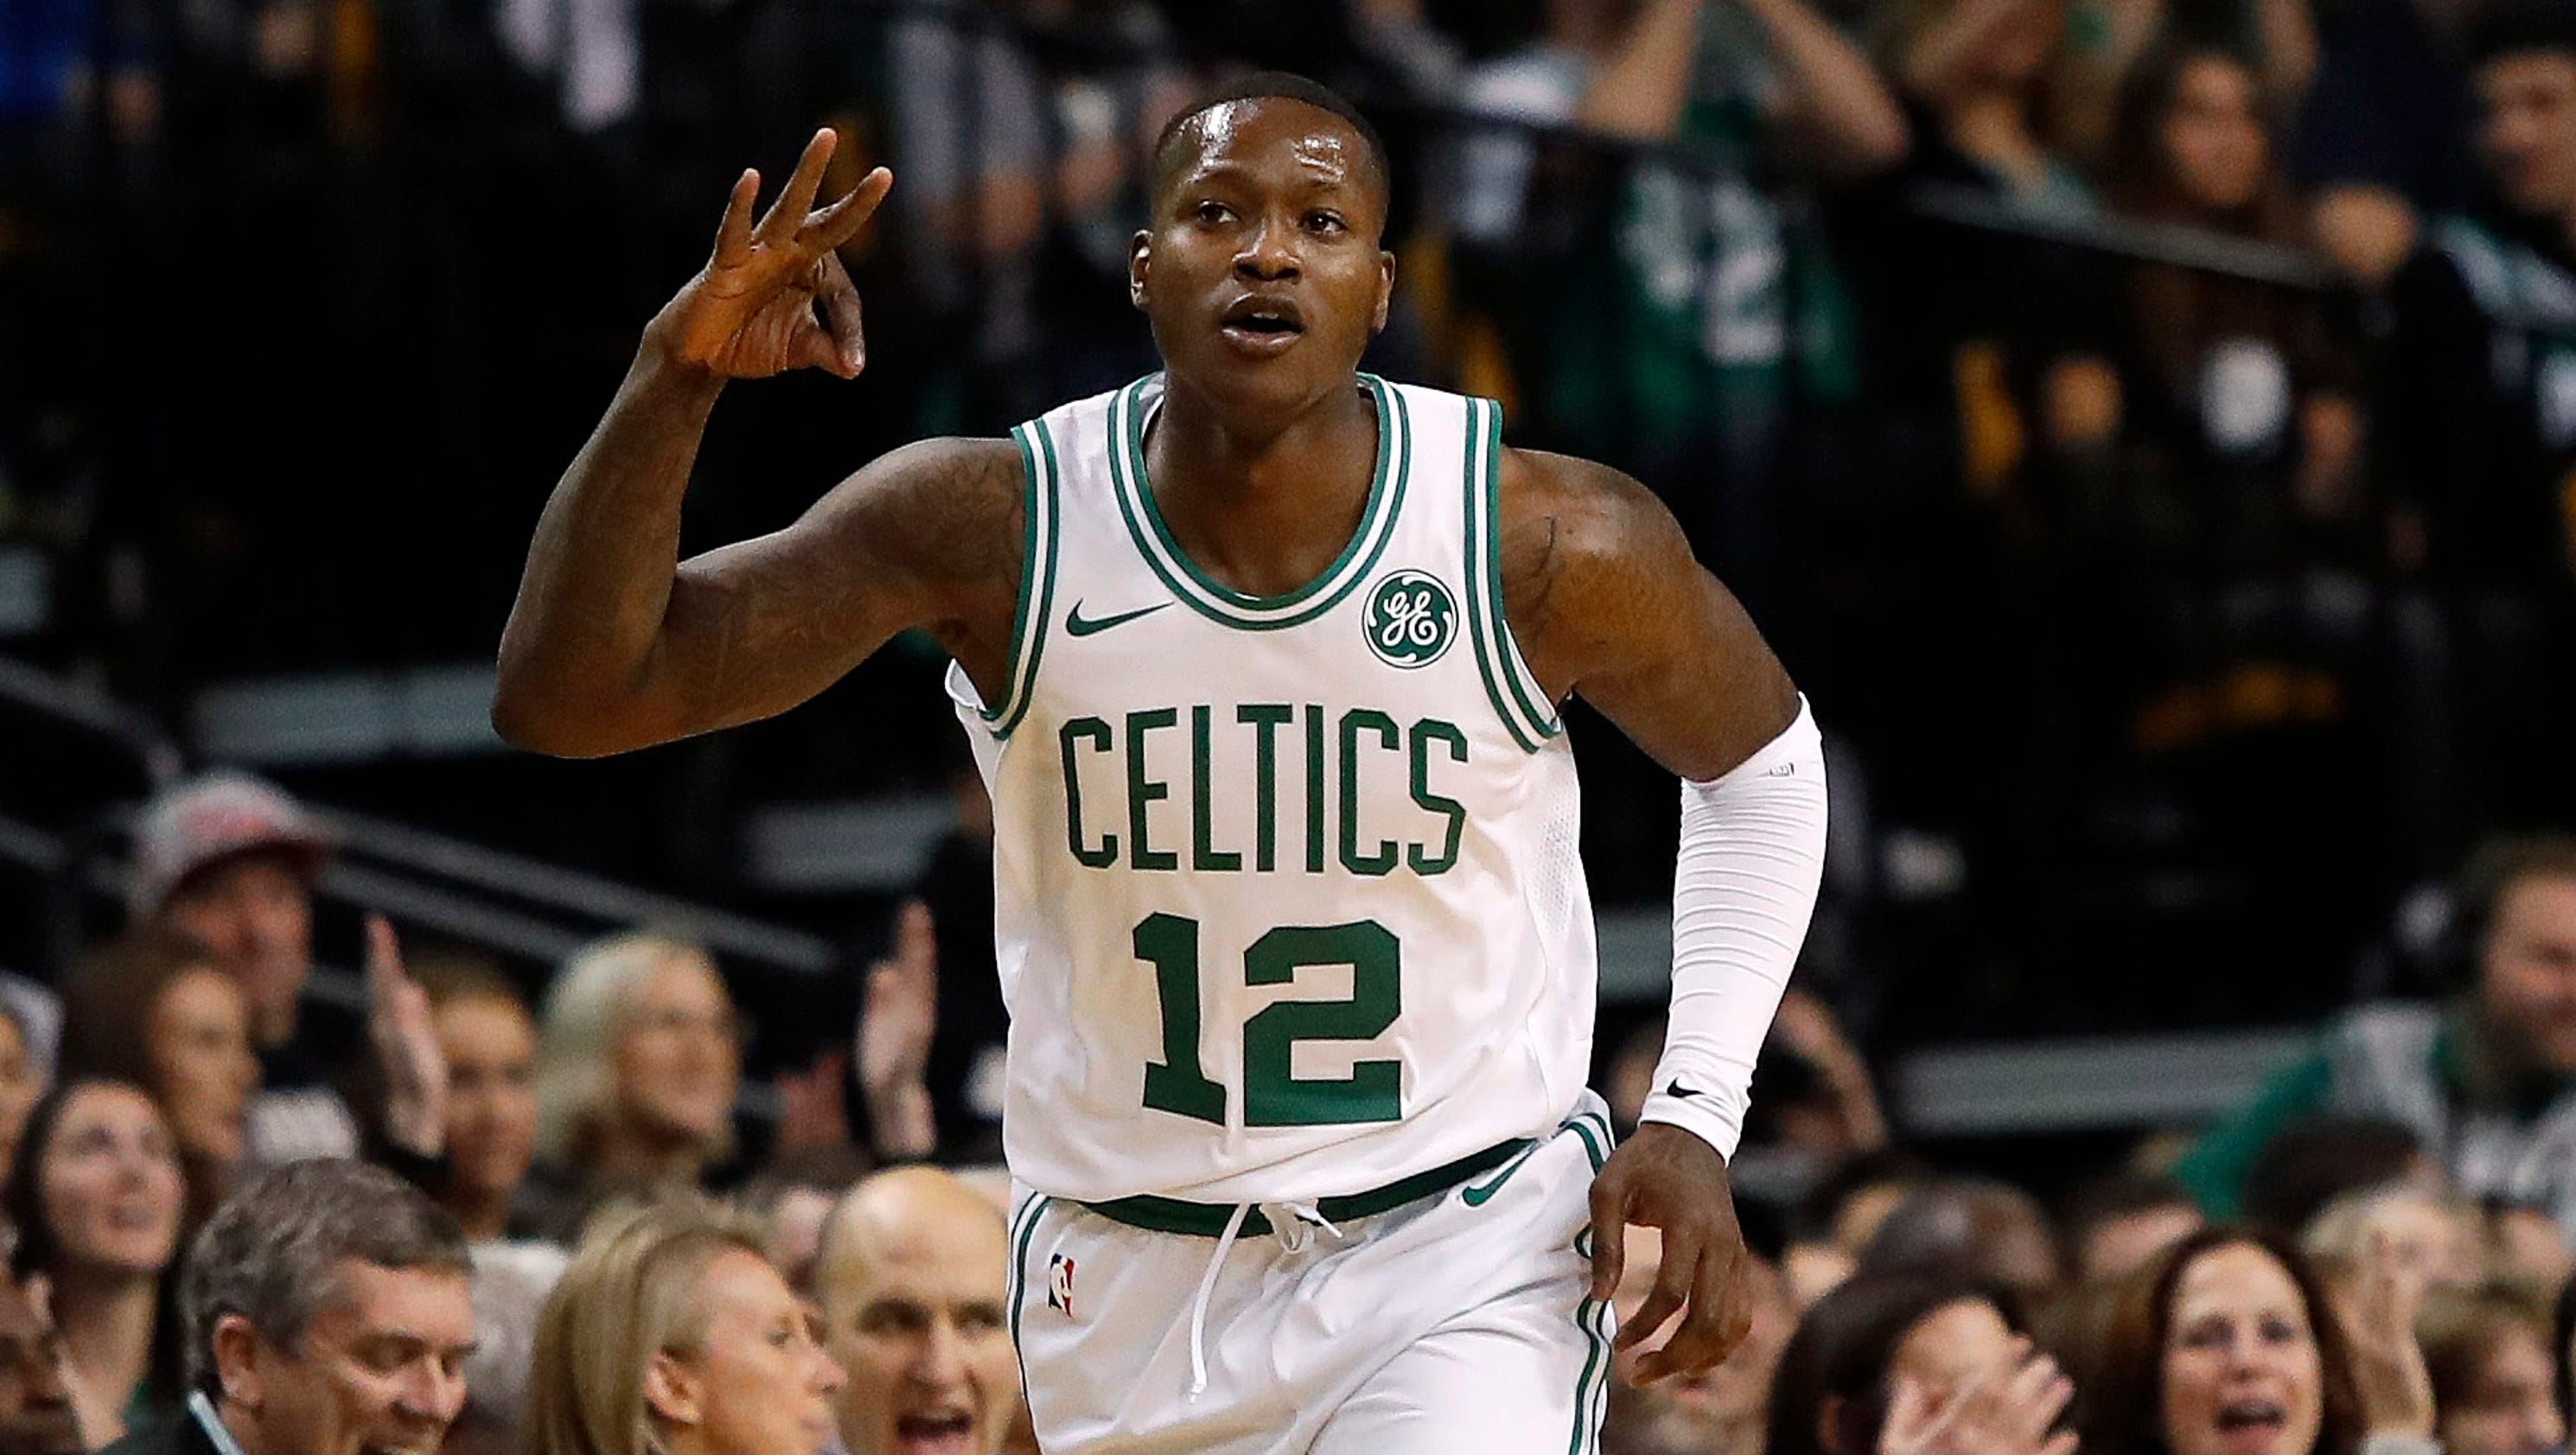 Terry Rozier has triple-double in first career start to help Celtics rout Knicks